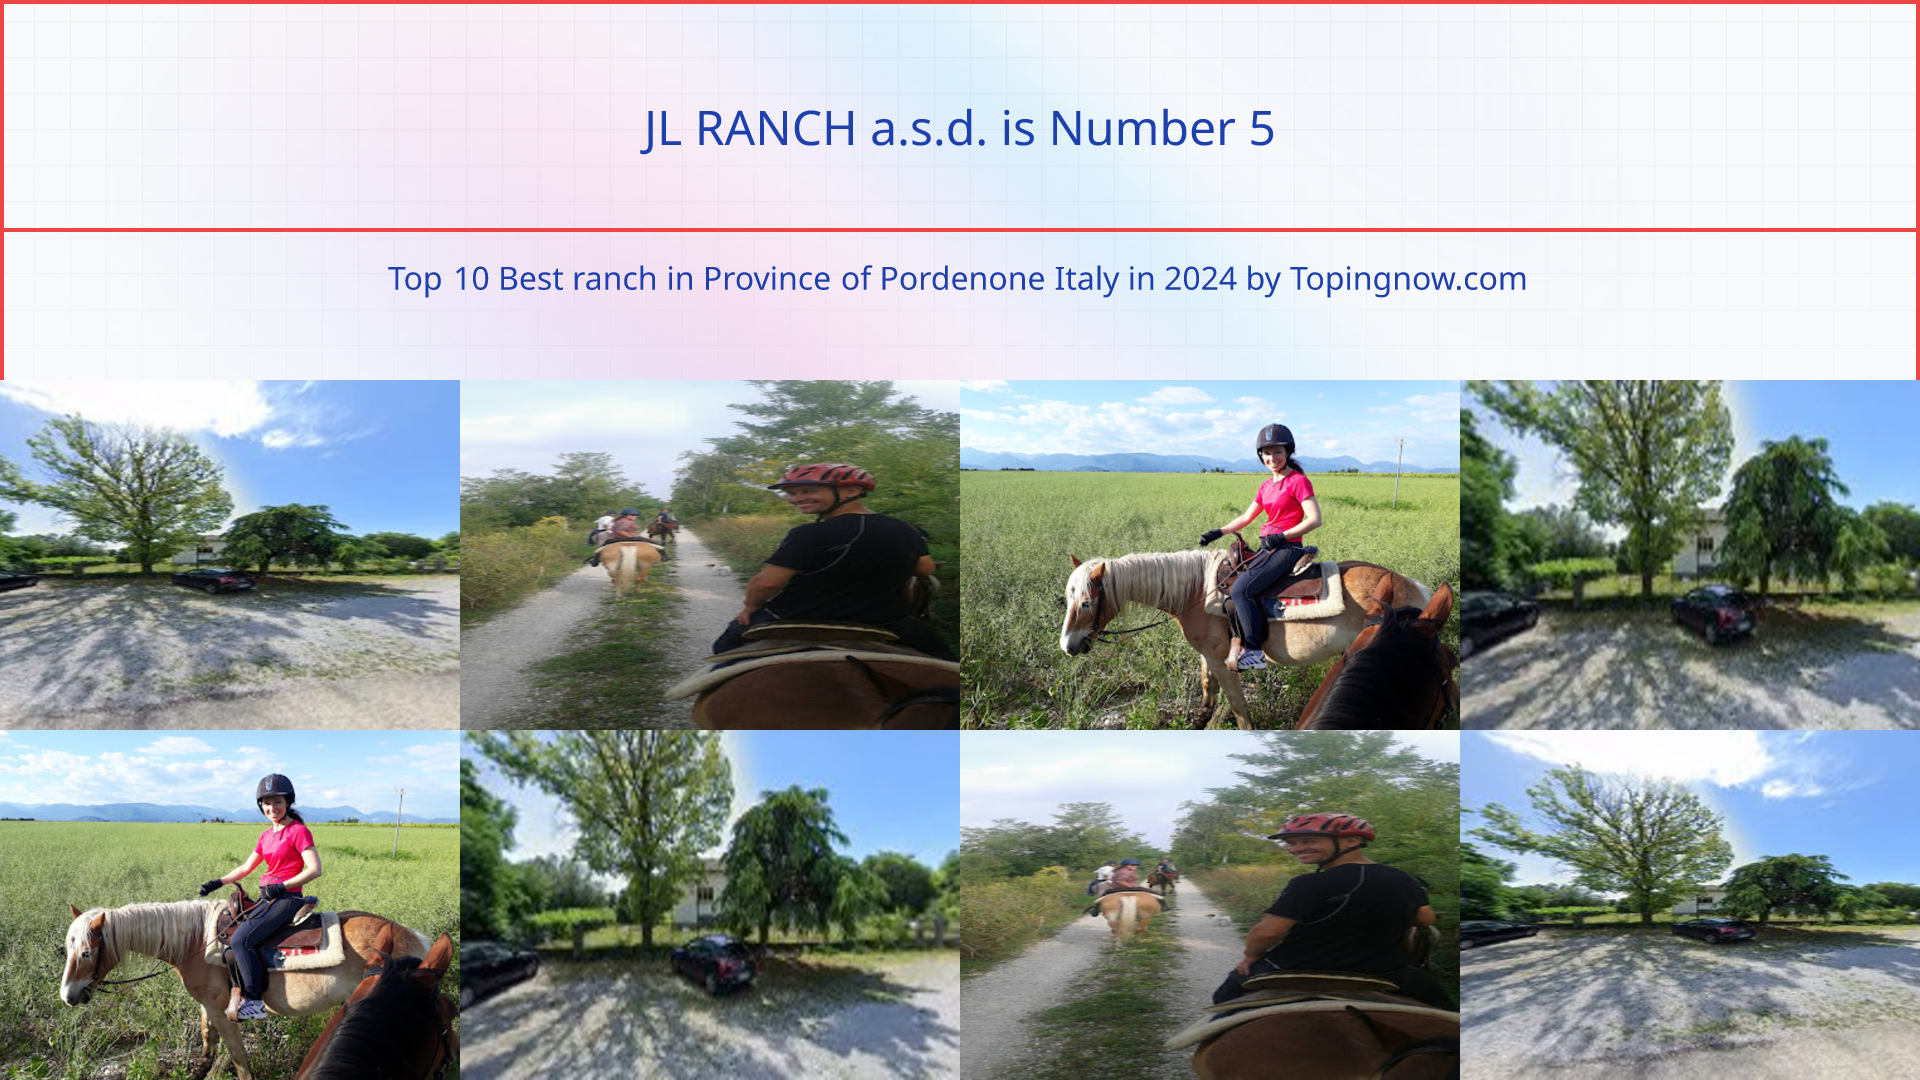 JL RANCH a.s.d.: Top 10 Best ranch in Province of Pordenone Italy in 2024